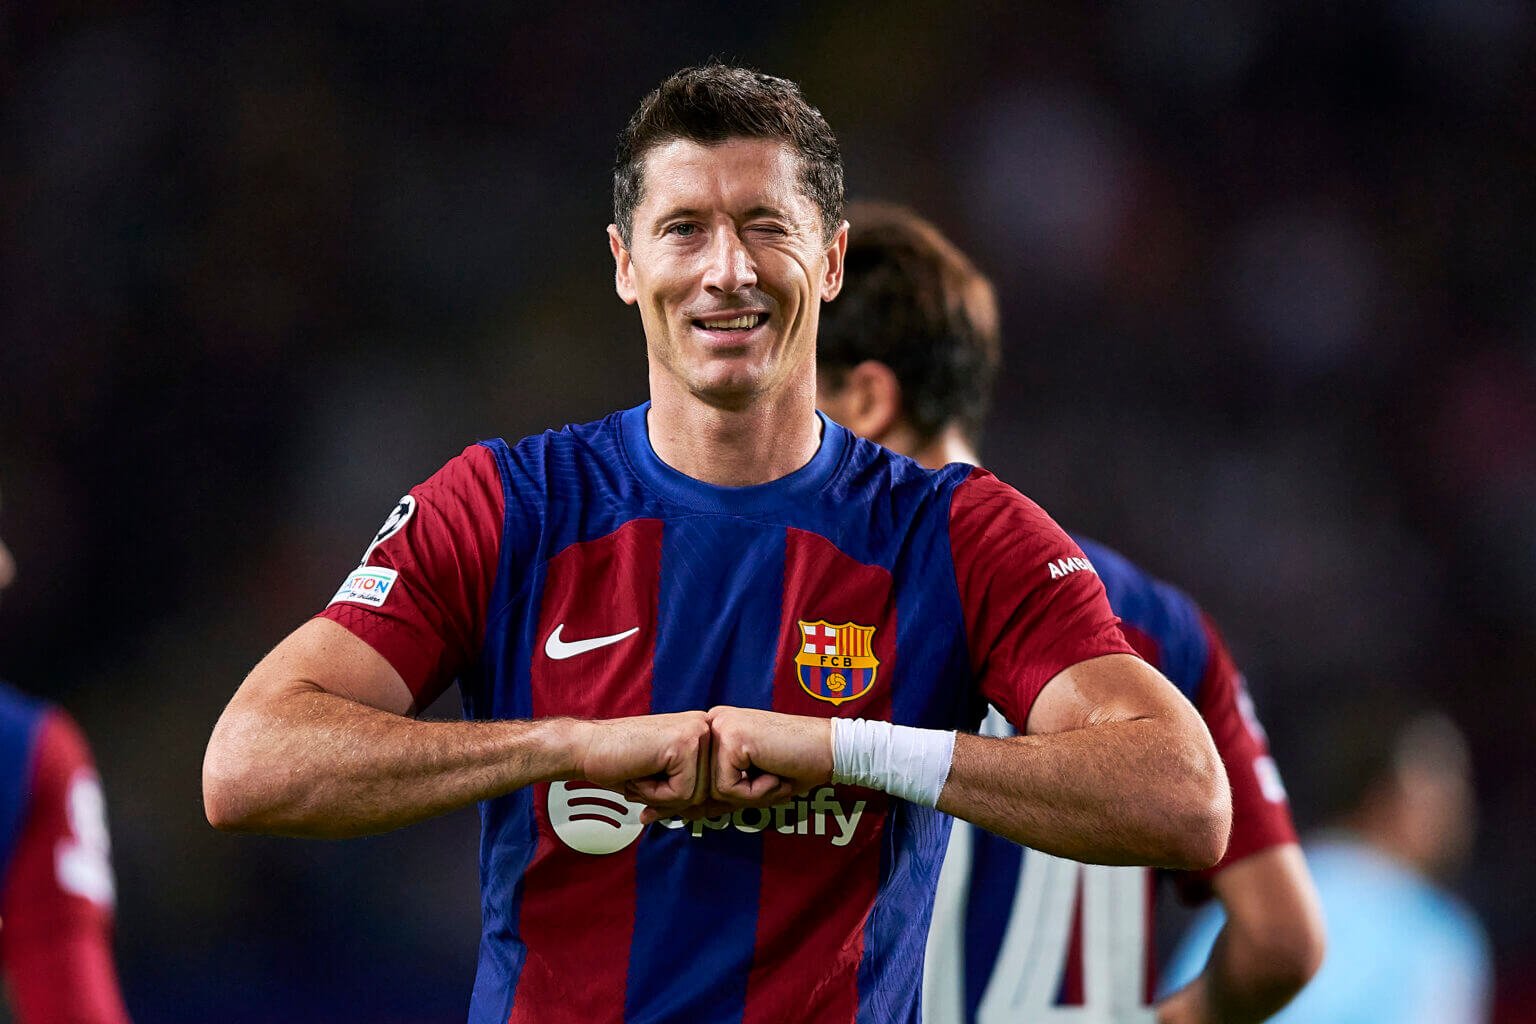 Robert Lewandowski snub his 16-year-old team-mate? Barcelona striker answers fan wrath at footage which seemed to show him dismissing a high-five from a youngster after he neglected to pass to him Robert Lewandowski has hit back